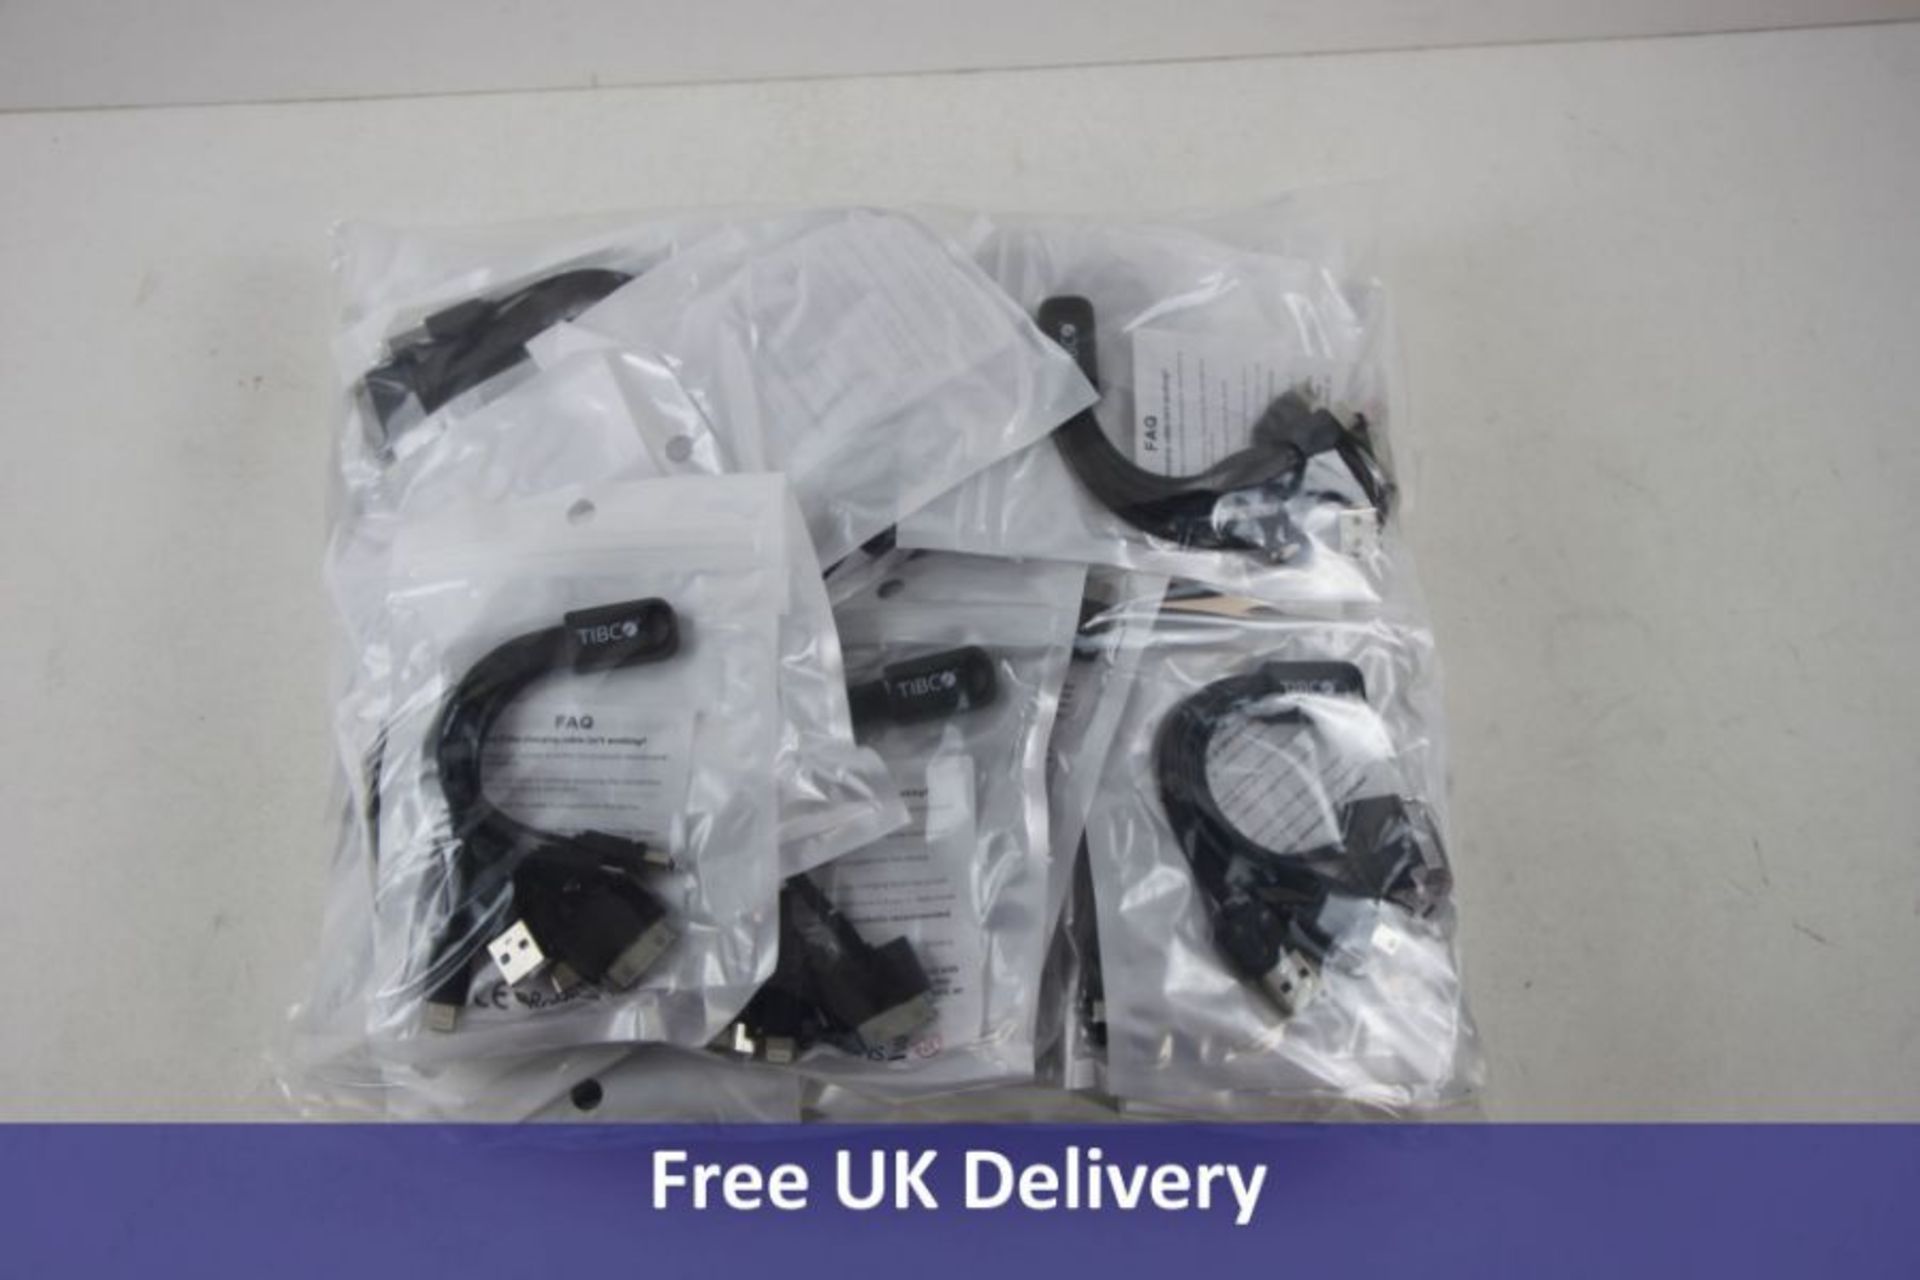 Forty Tibco Multi Charging Cables, 6 in 1